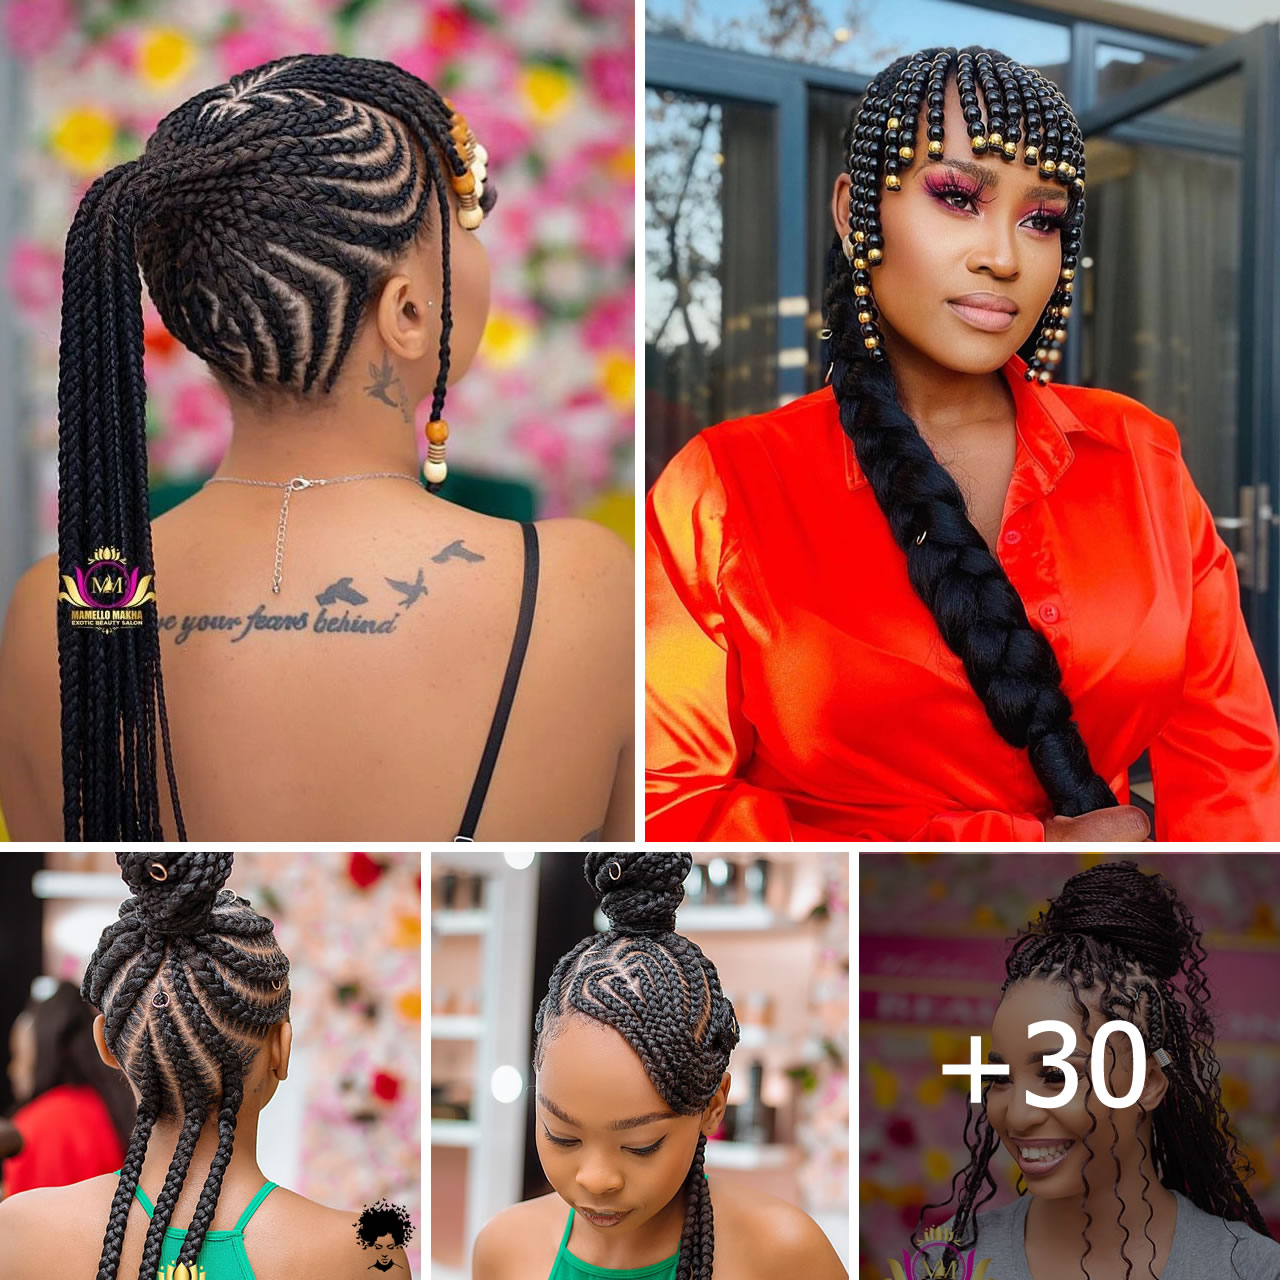 Stylish Recent Braided Hairstyles You Should Consider, Volume 6.